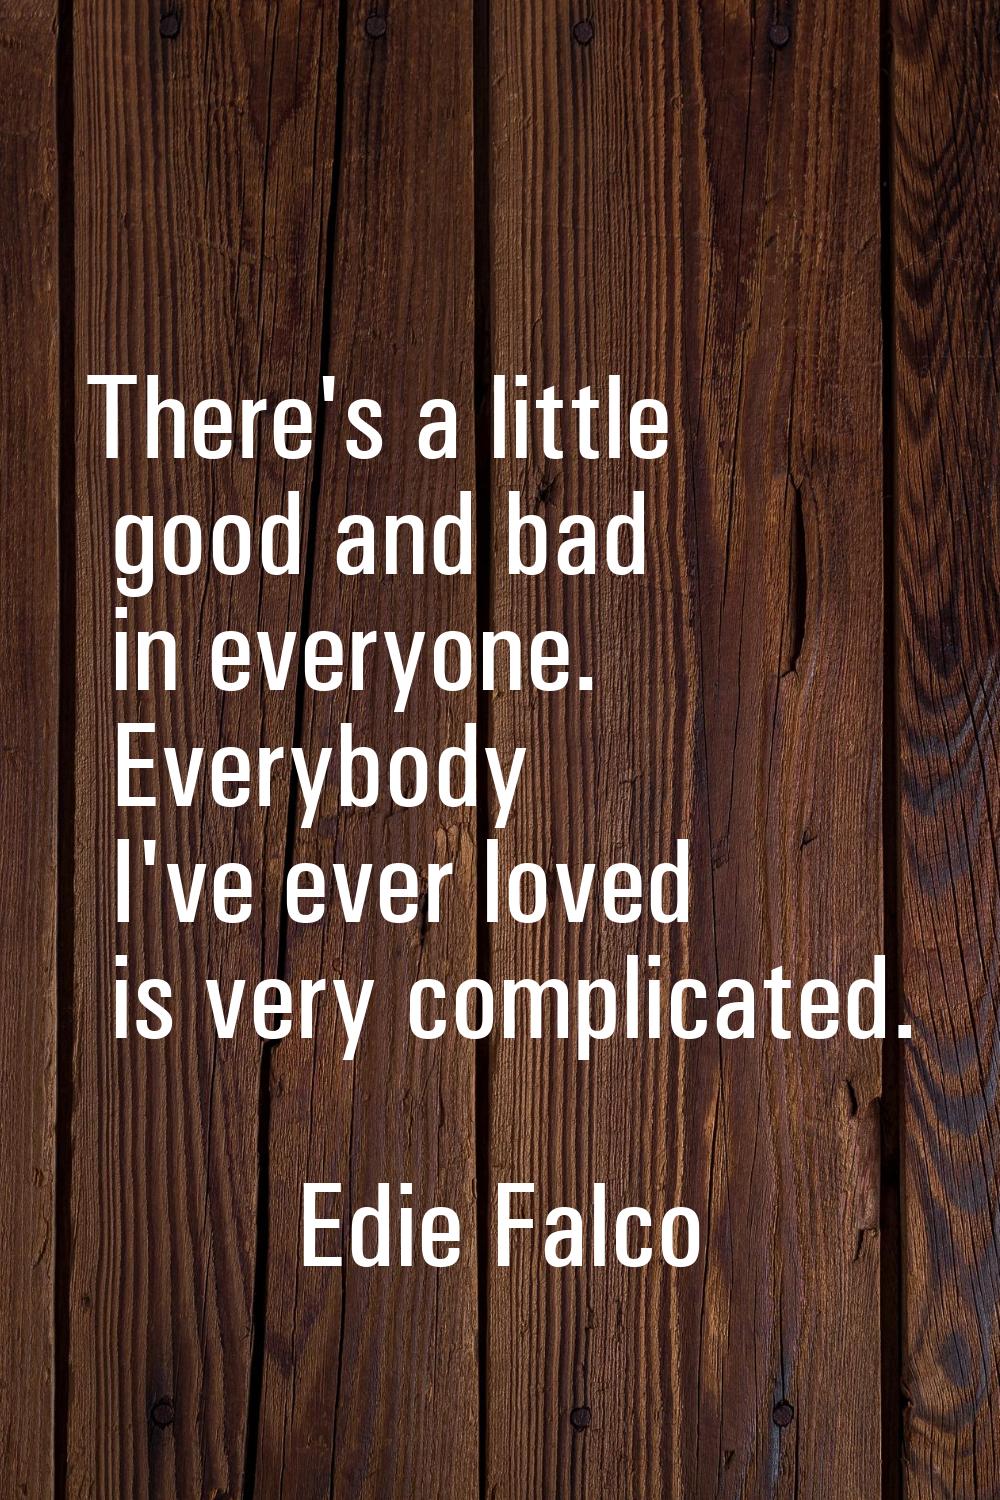 There's a little good and bad in everyone. Everybody I've ever loved is very complicated.